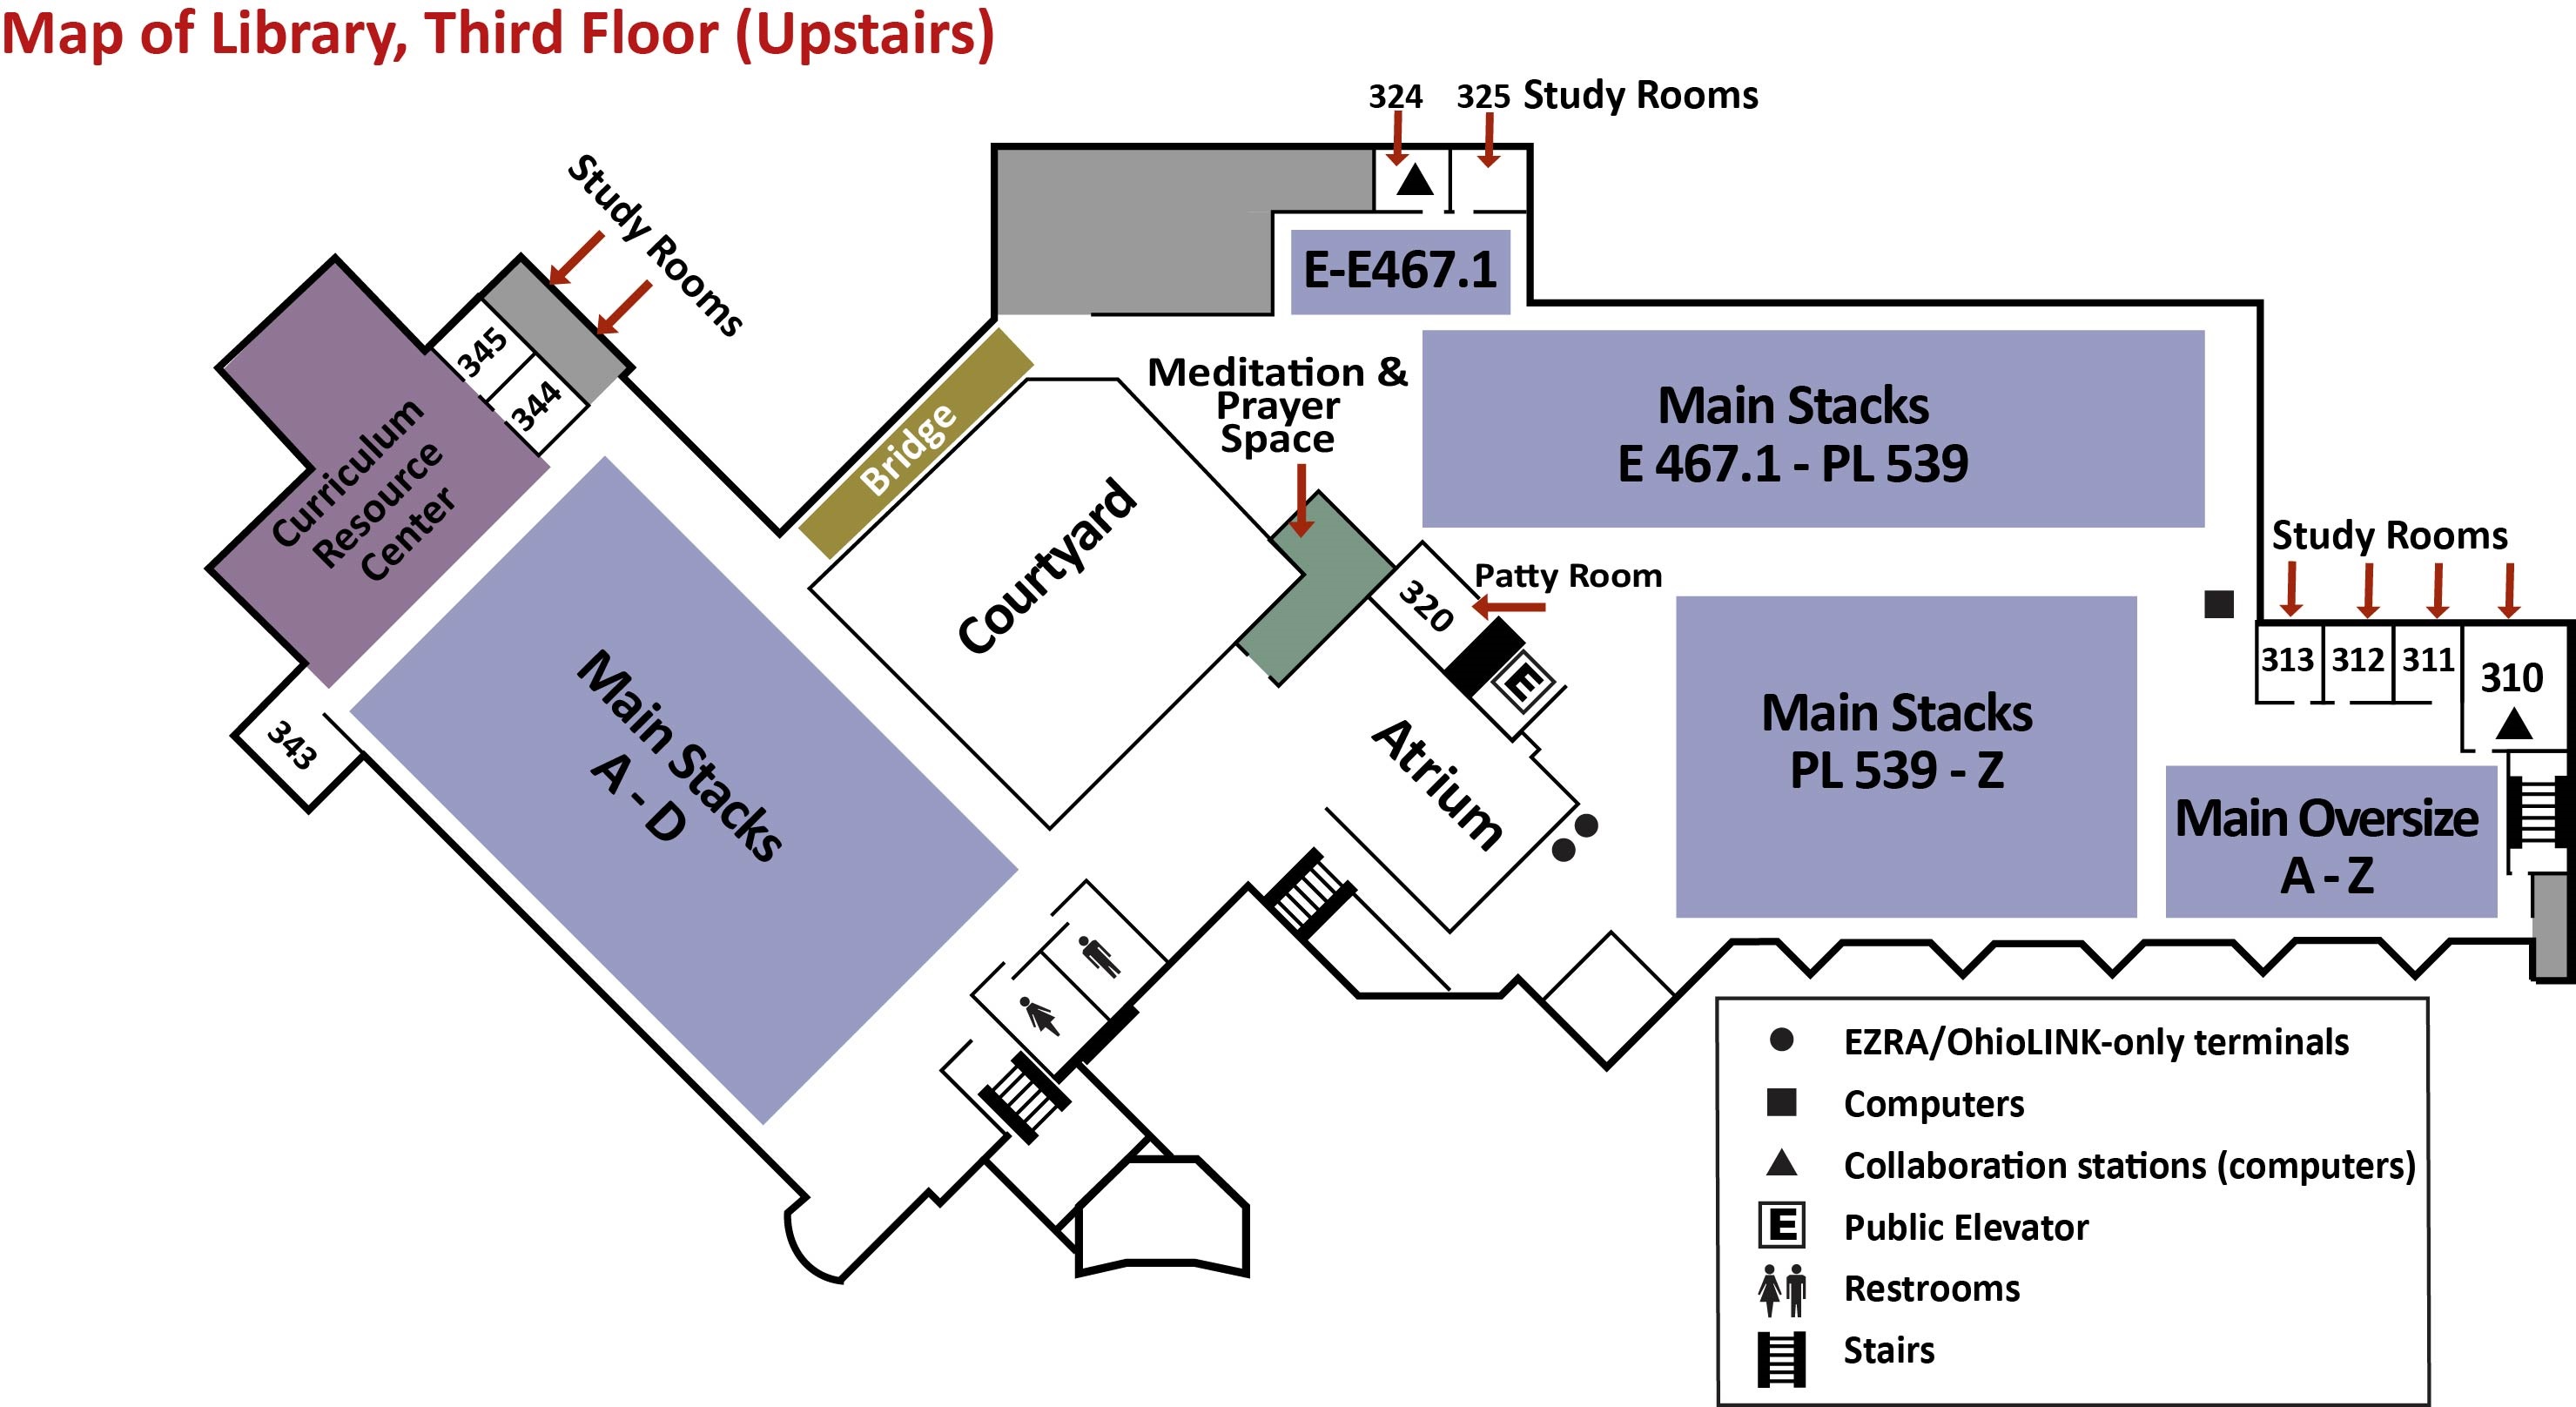 Map of Library Third Floor (Upstairs)